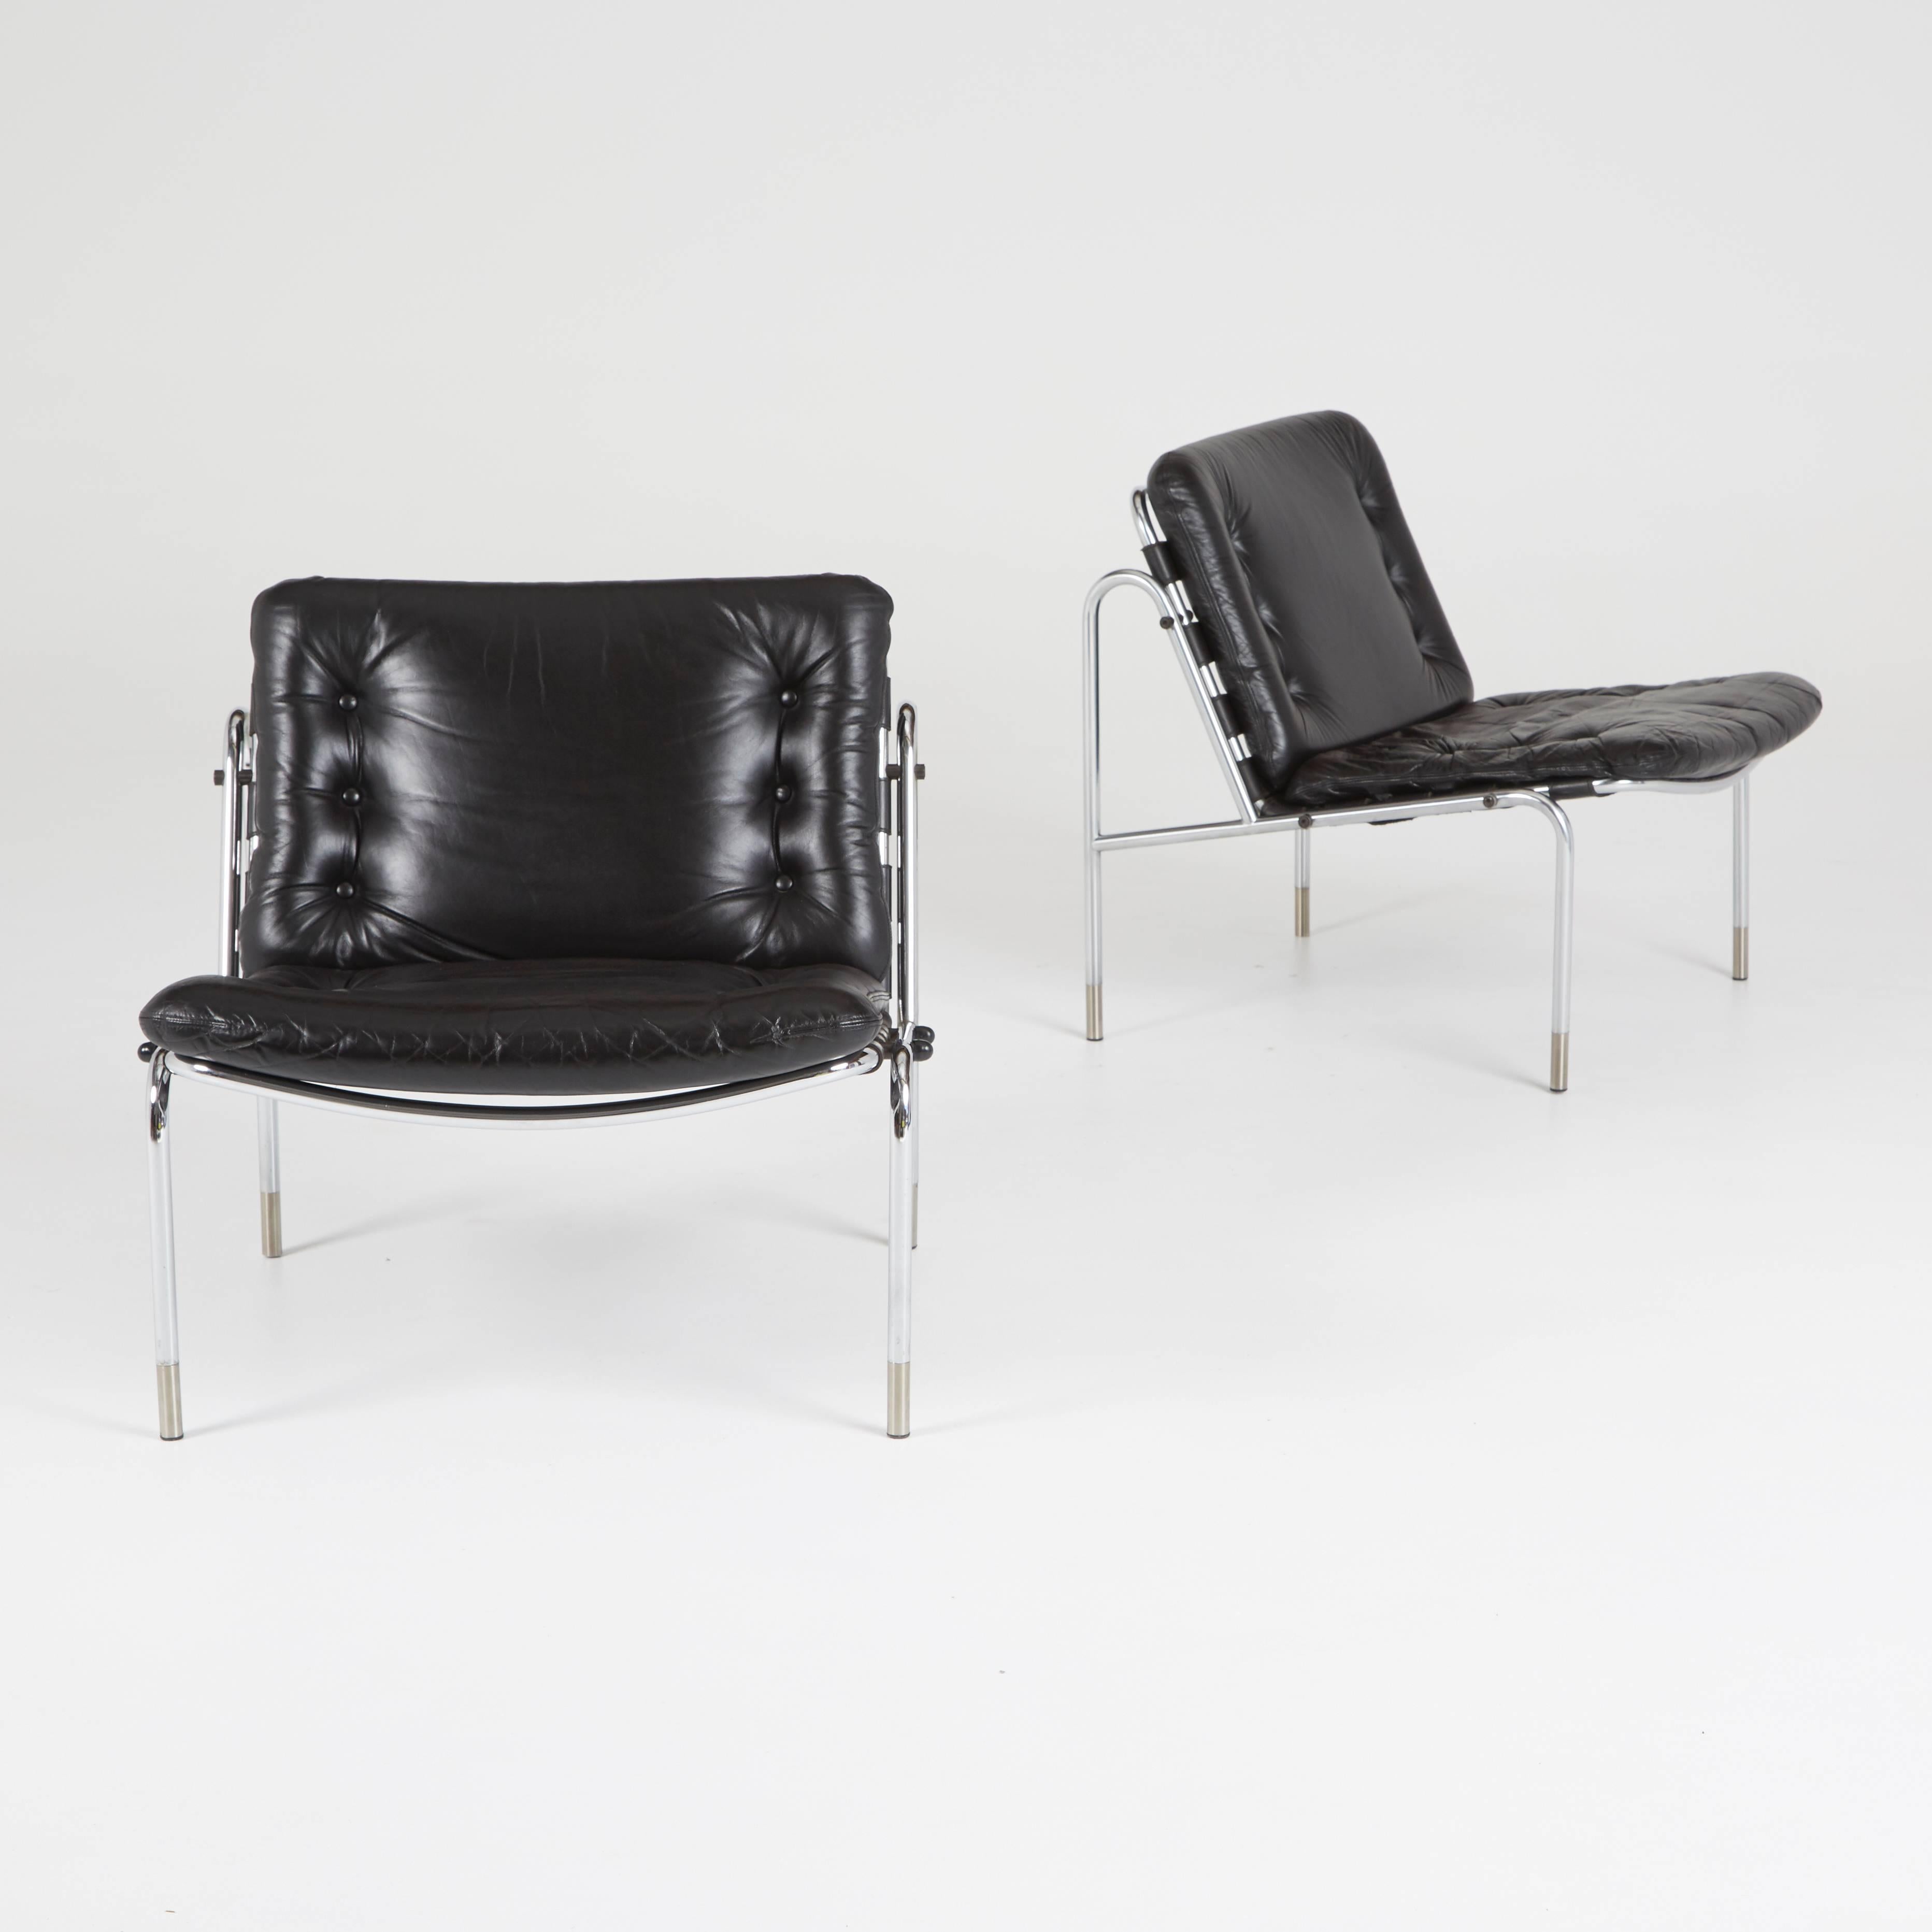 American Kyoto Chairs by Martin Visser for 't Spectrum, Rare 